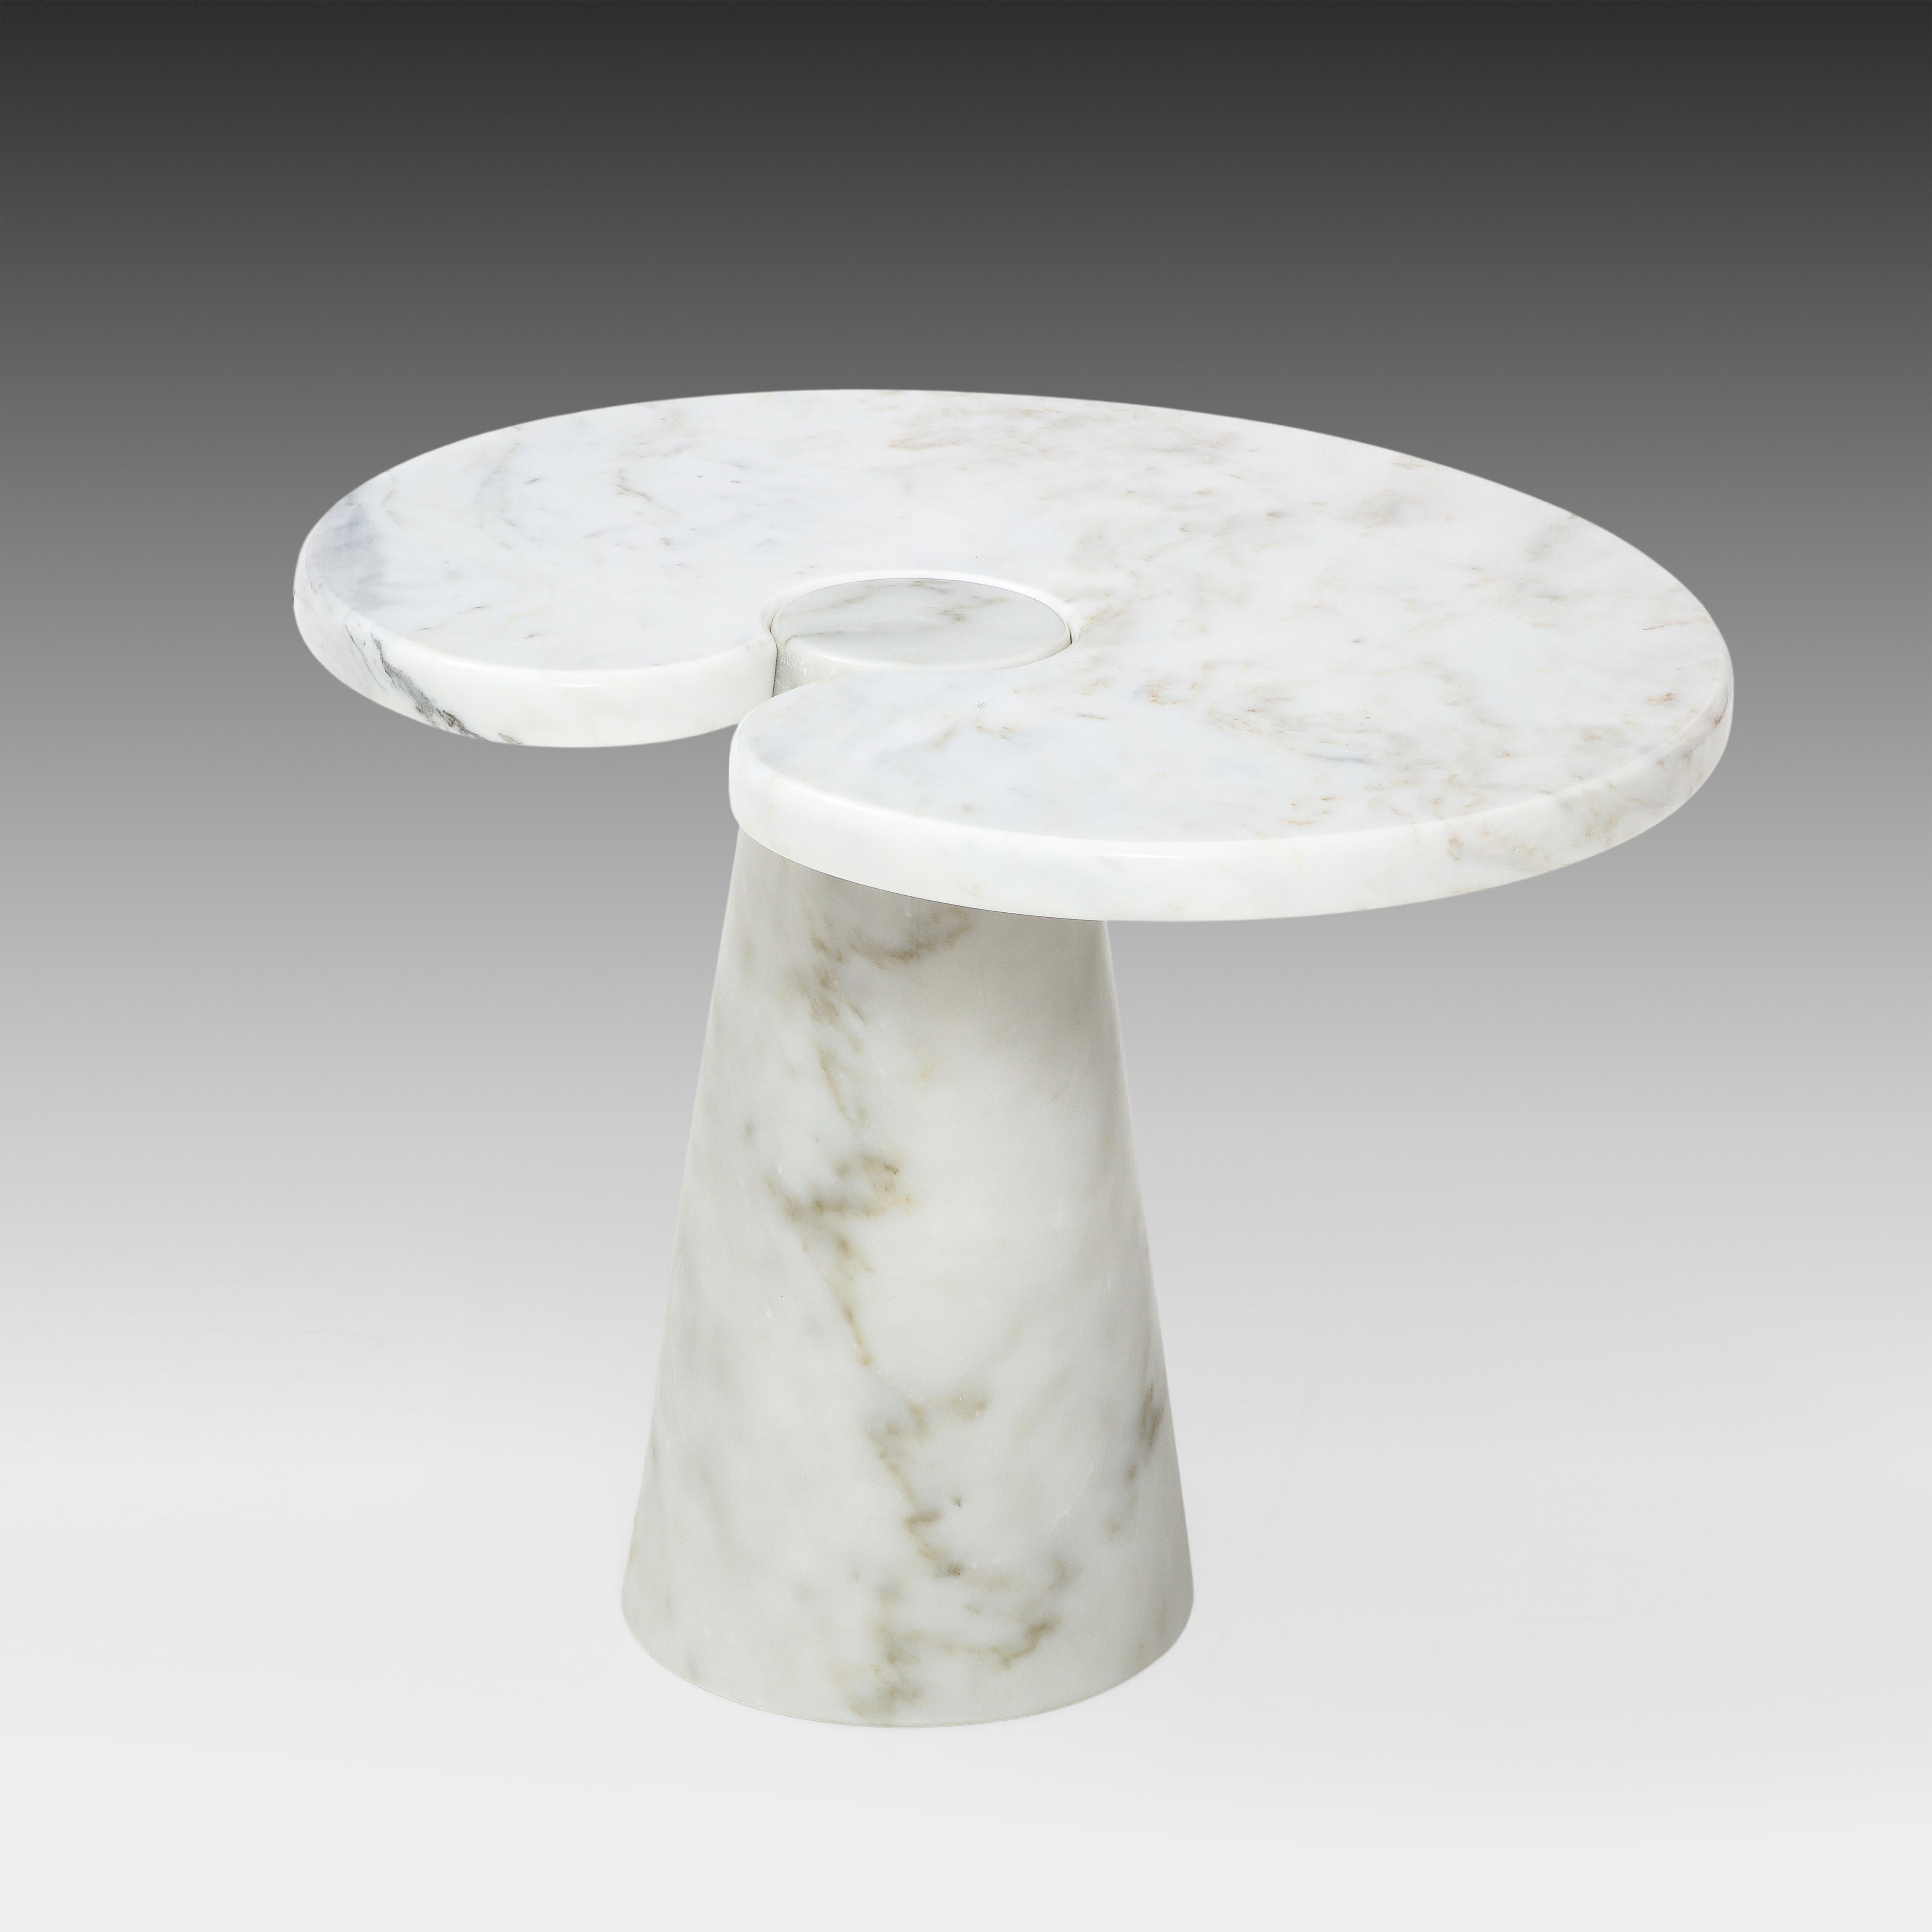 Designed by Angelo Mangiarotti for Skipper from the Eros series, Carrara marble side table with top fitted on conical base. This elegantly organic table has beautiful subtle veining throughout. Original Skipper label on underside. As the label